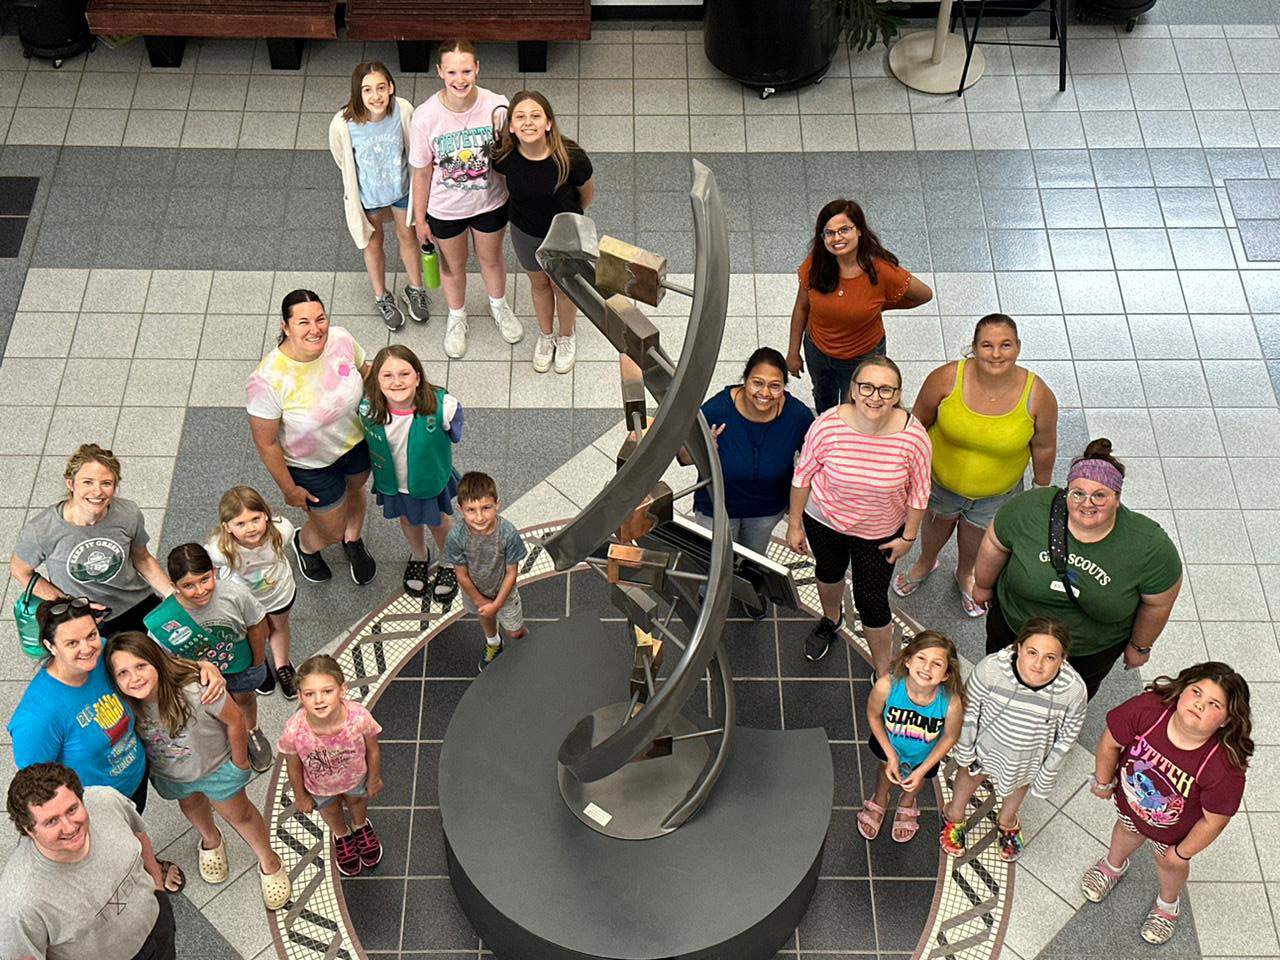 Dr. Katarzyna Glowacka's lab hosted an event with 12 Girl Scouts from across Nebraska.